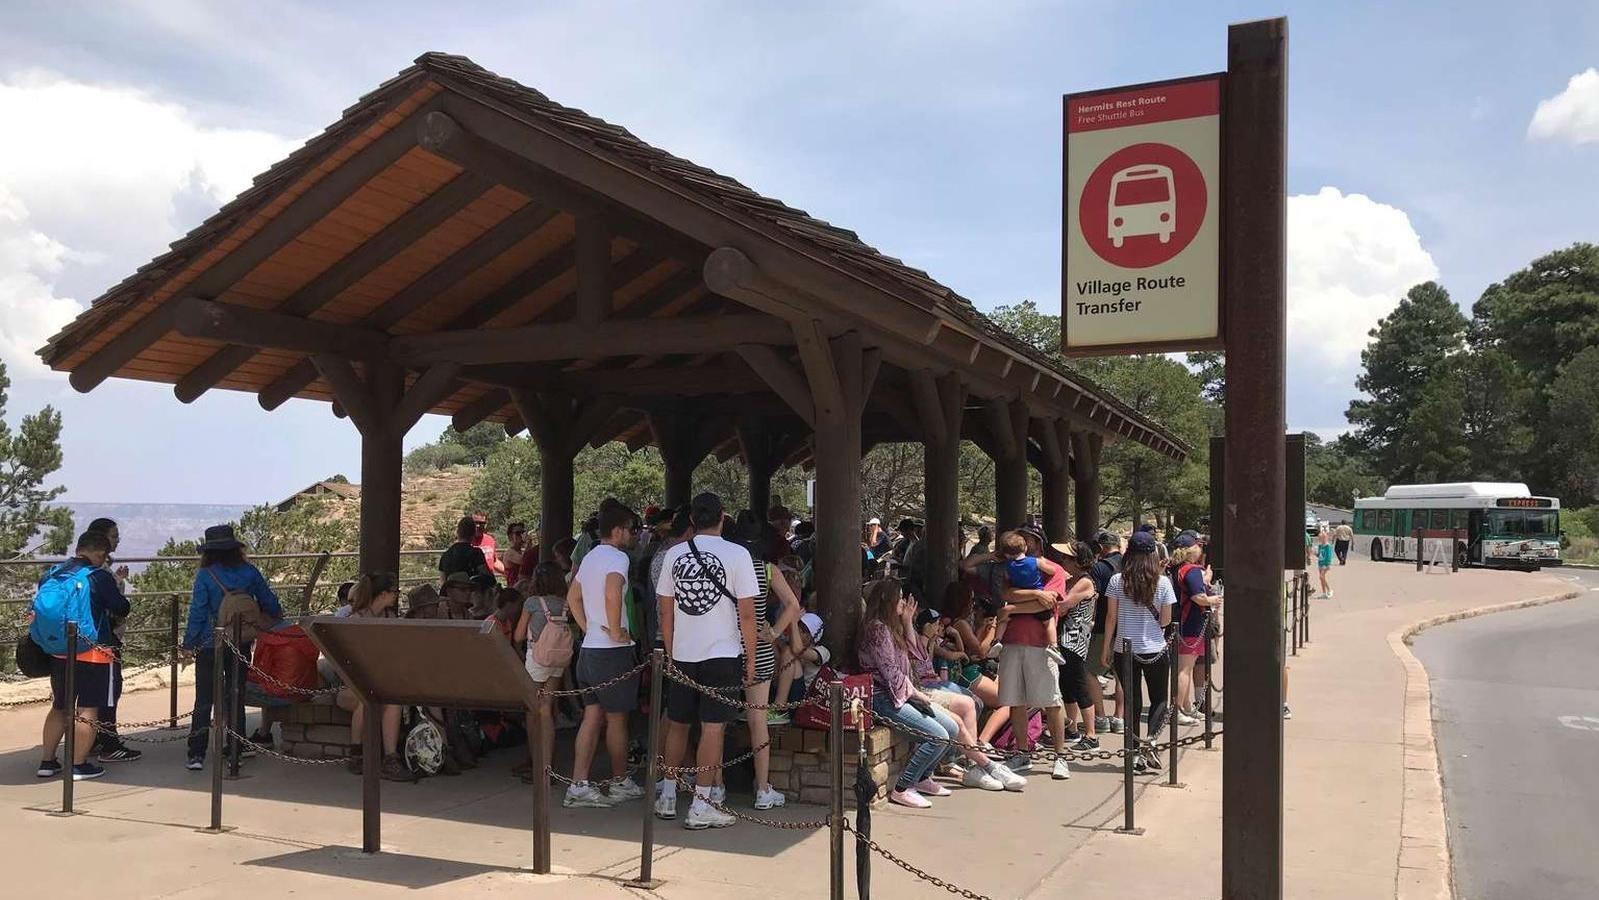 A long line of people wait under a peaked shade structure at a bus stop marked by a red sign.